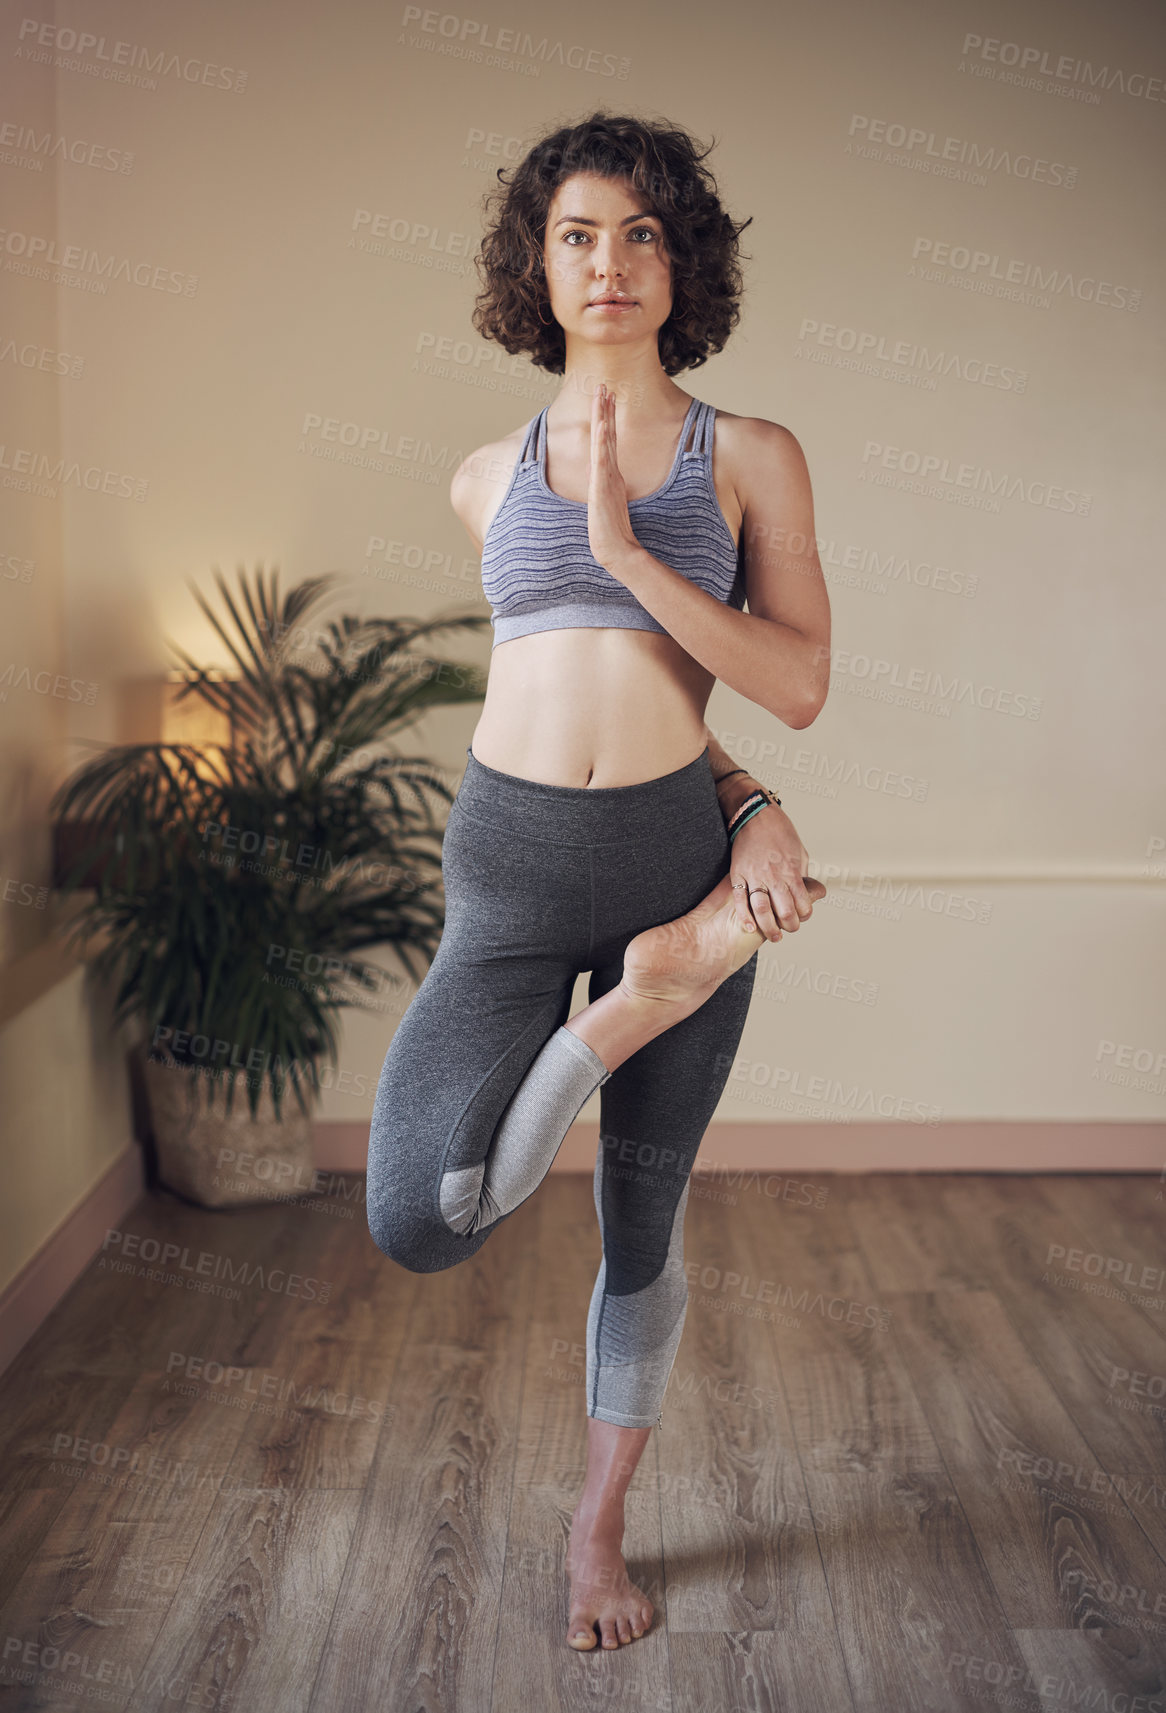 Buy stock photo Full length shot of an attractive young woman standing and holding an advanced yoga pose during an indoor yoga session